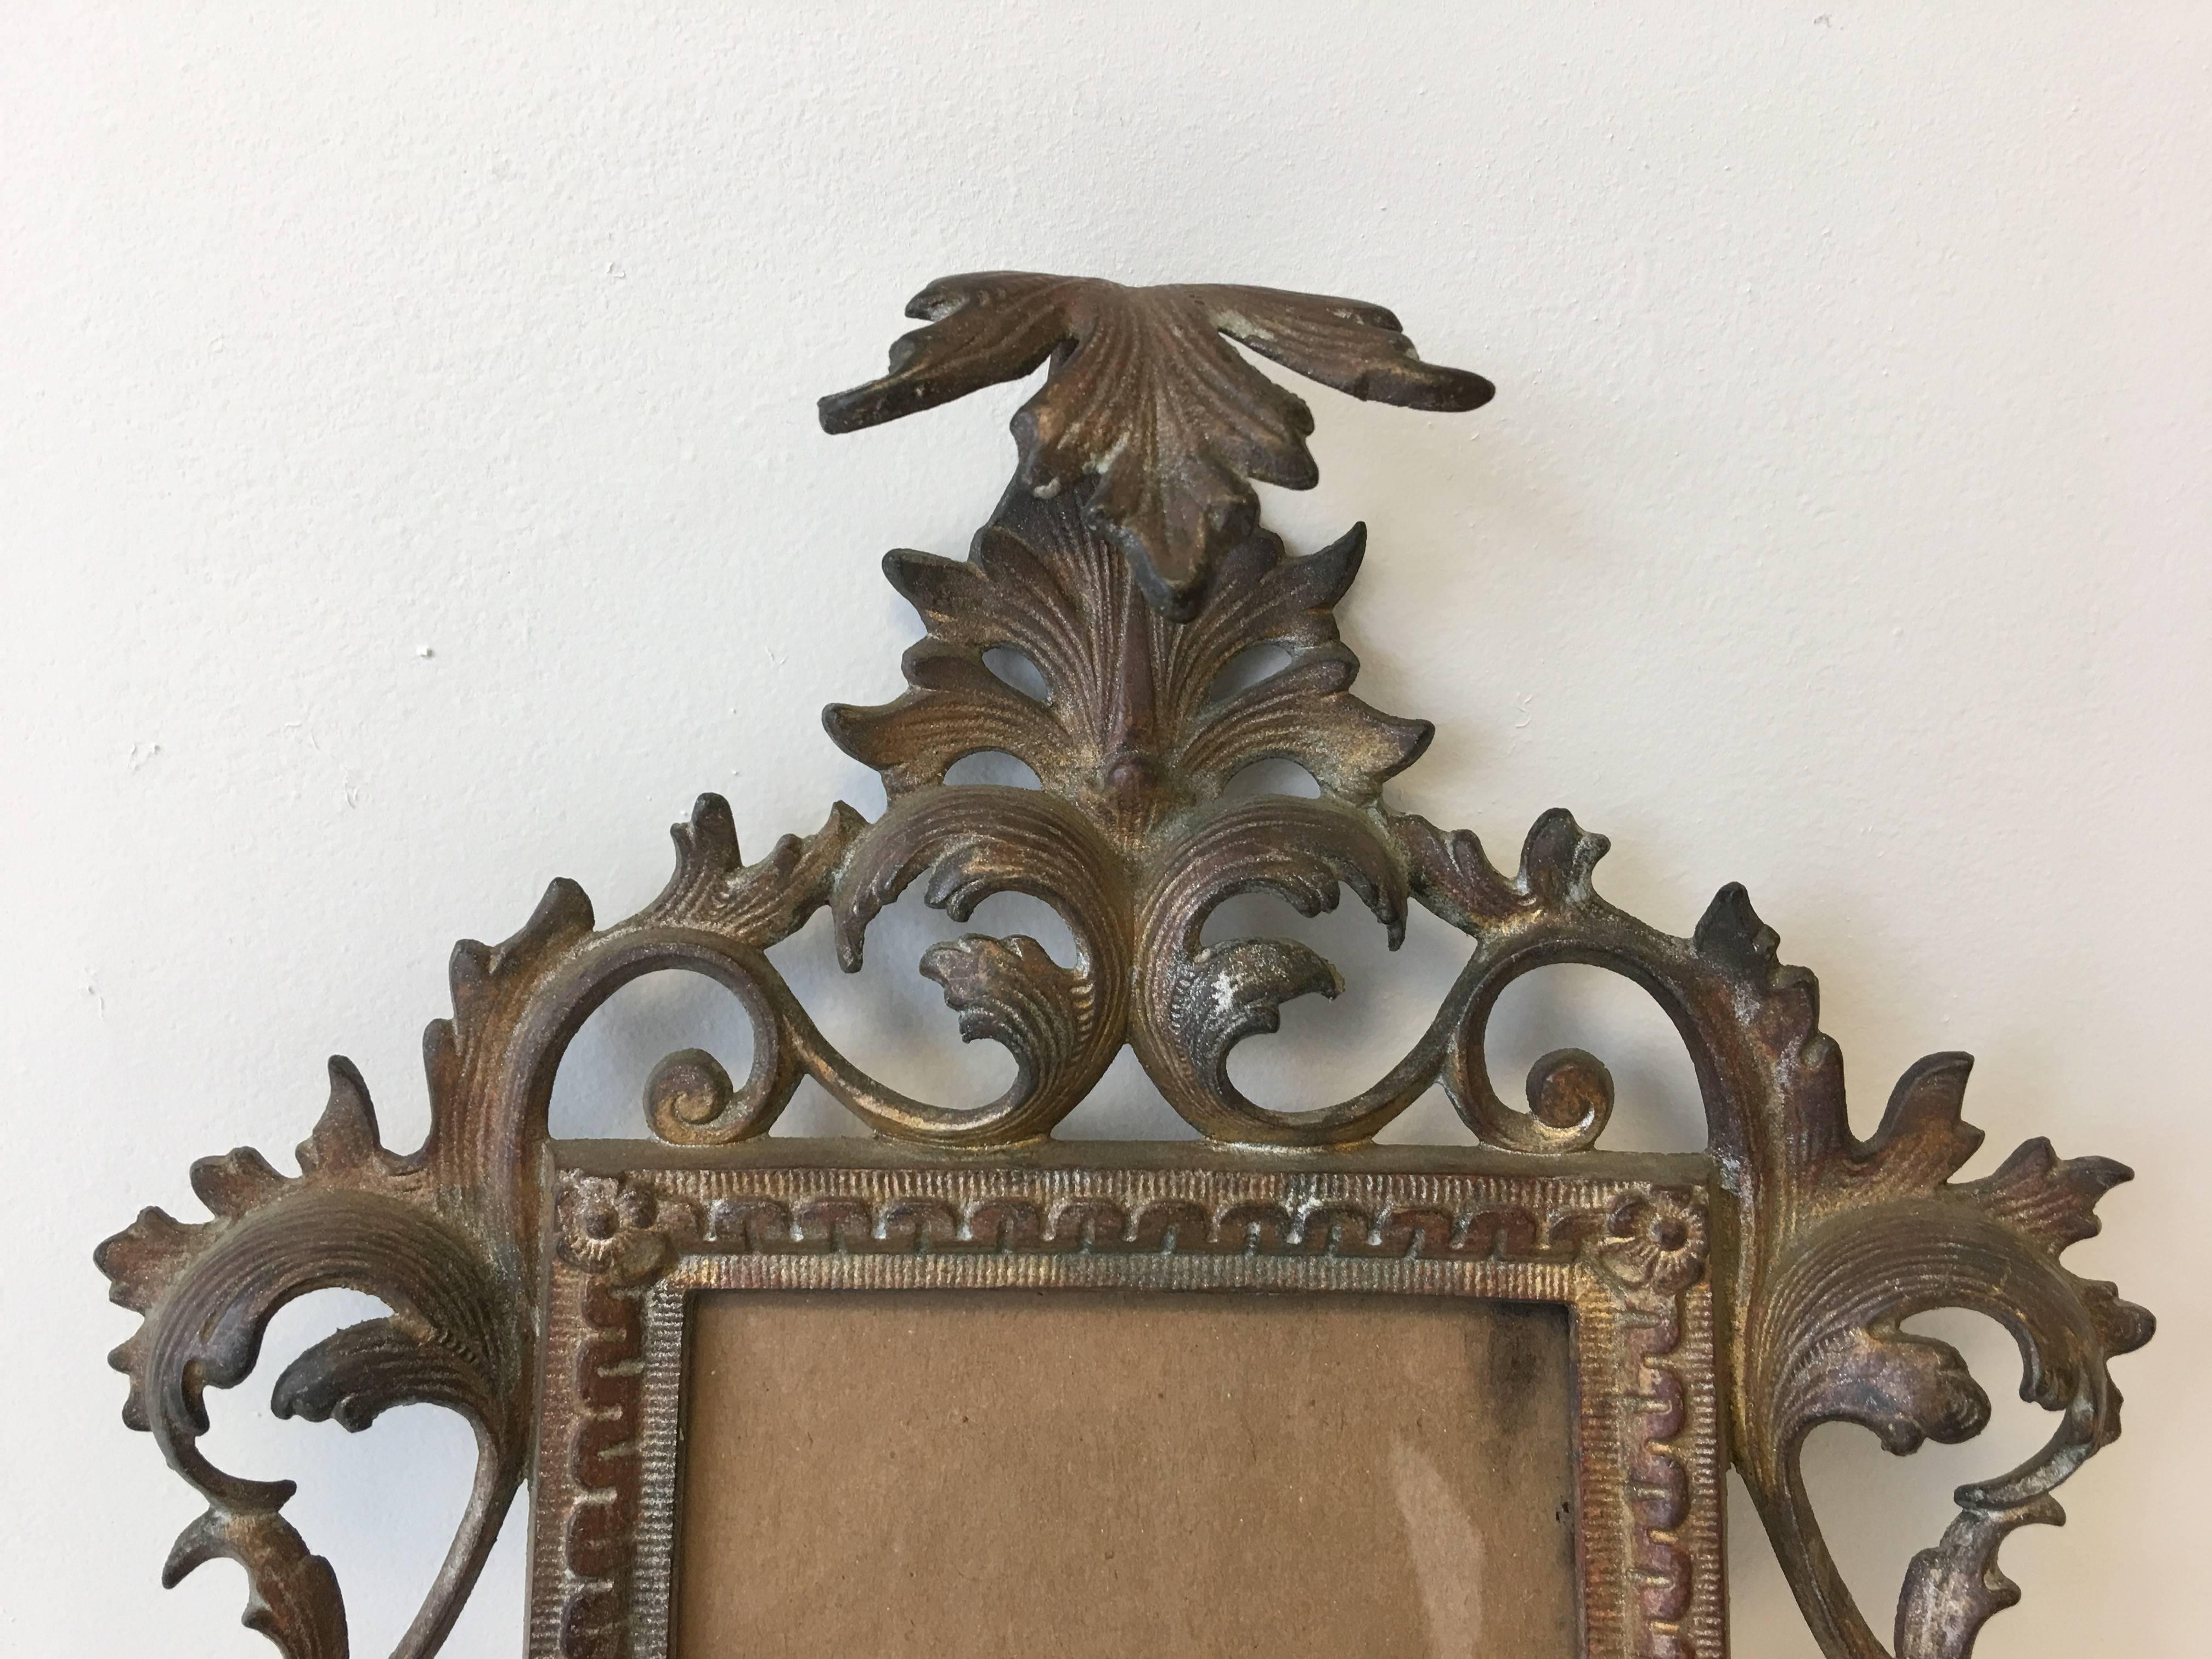 Offered is a stunning, 19th century Art Nouveau, bronze standing picture frame with immaculate detailing. Marked: 1894 on backside. Fits a 4